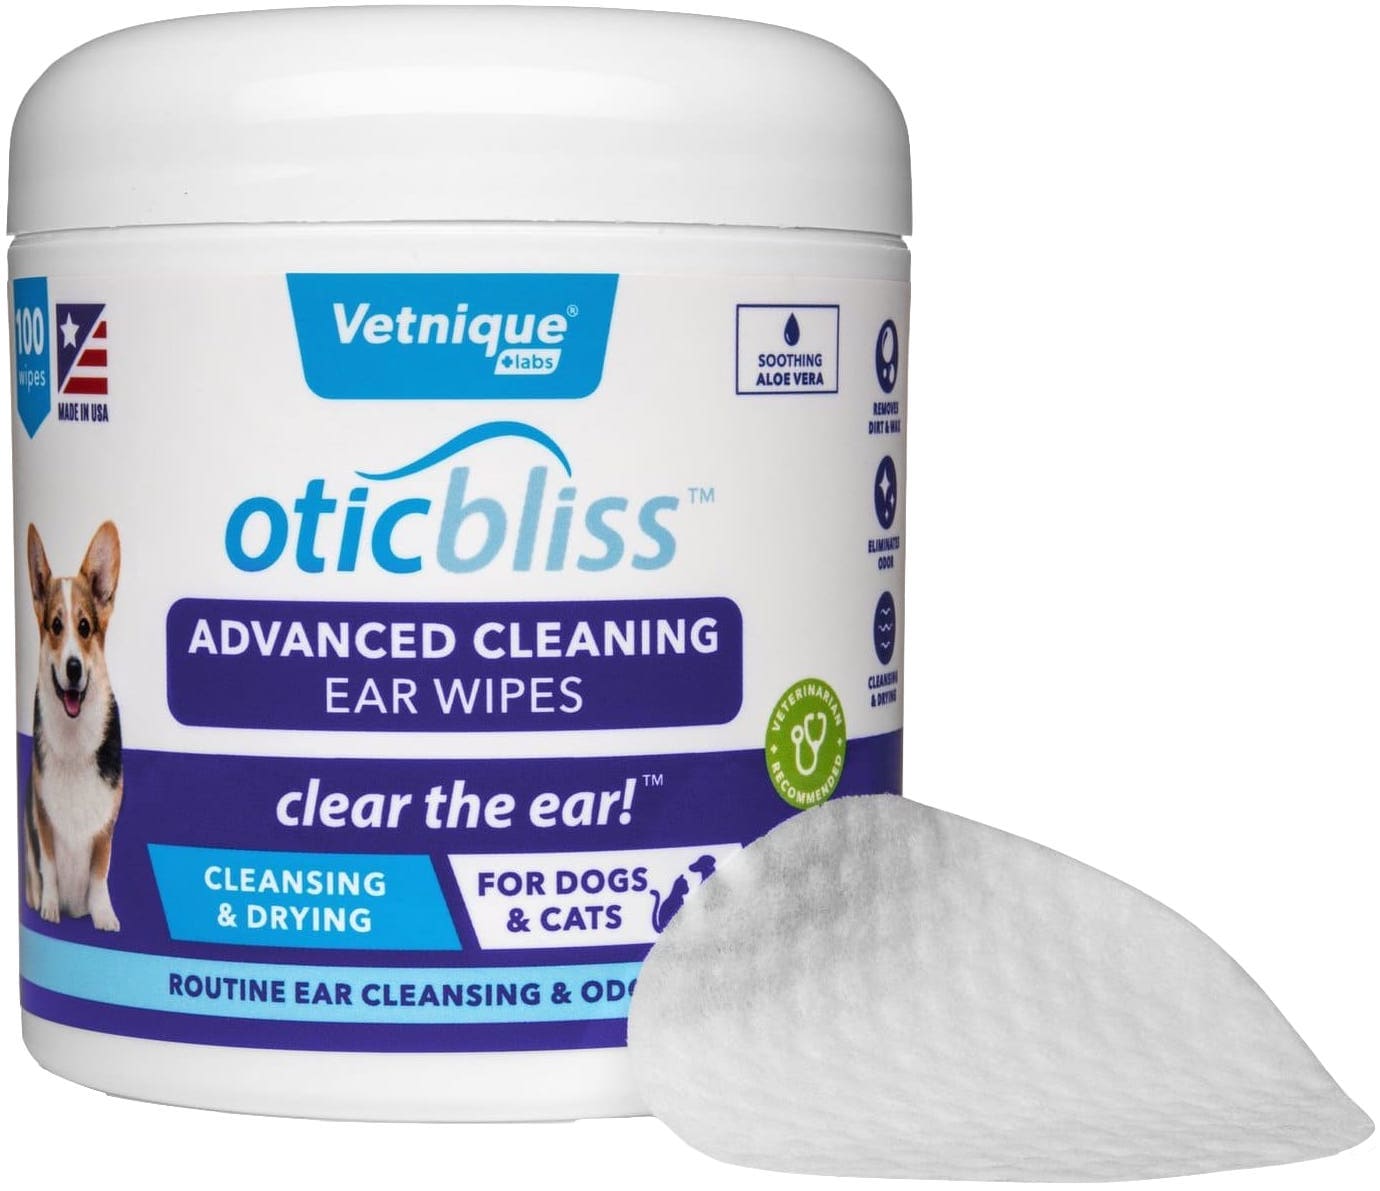 Oticbliss Advanced Cleaning Ear Wipes 